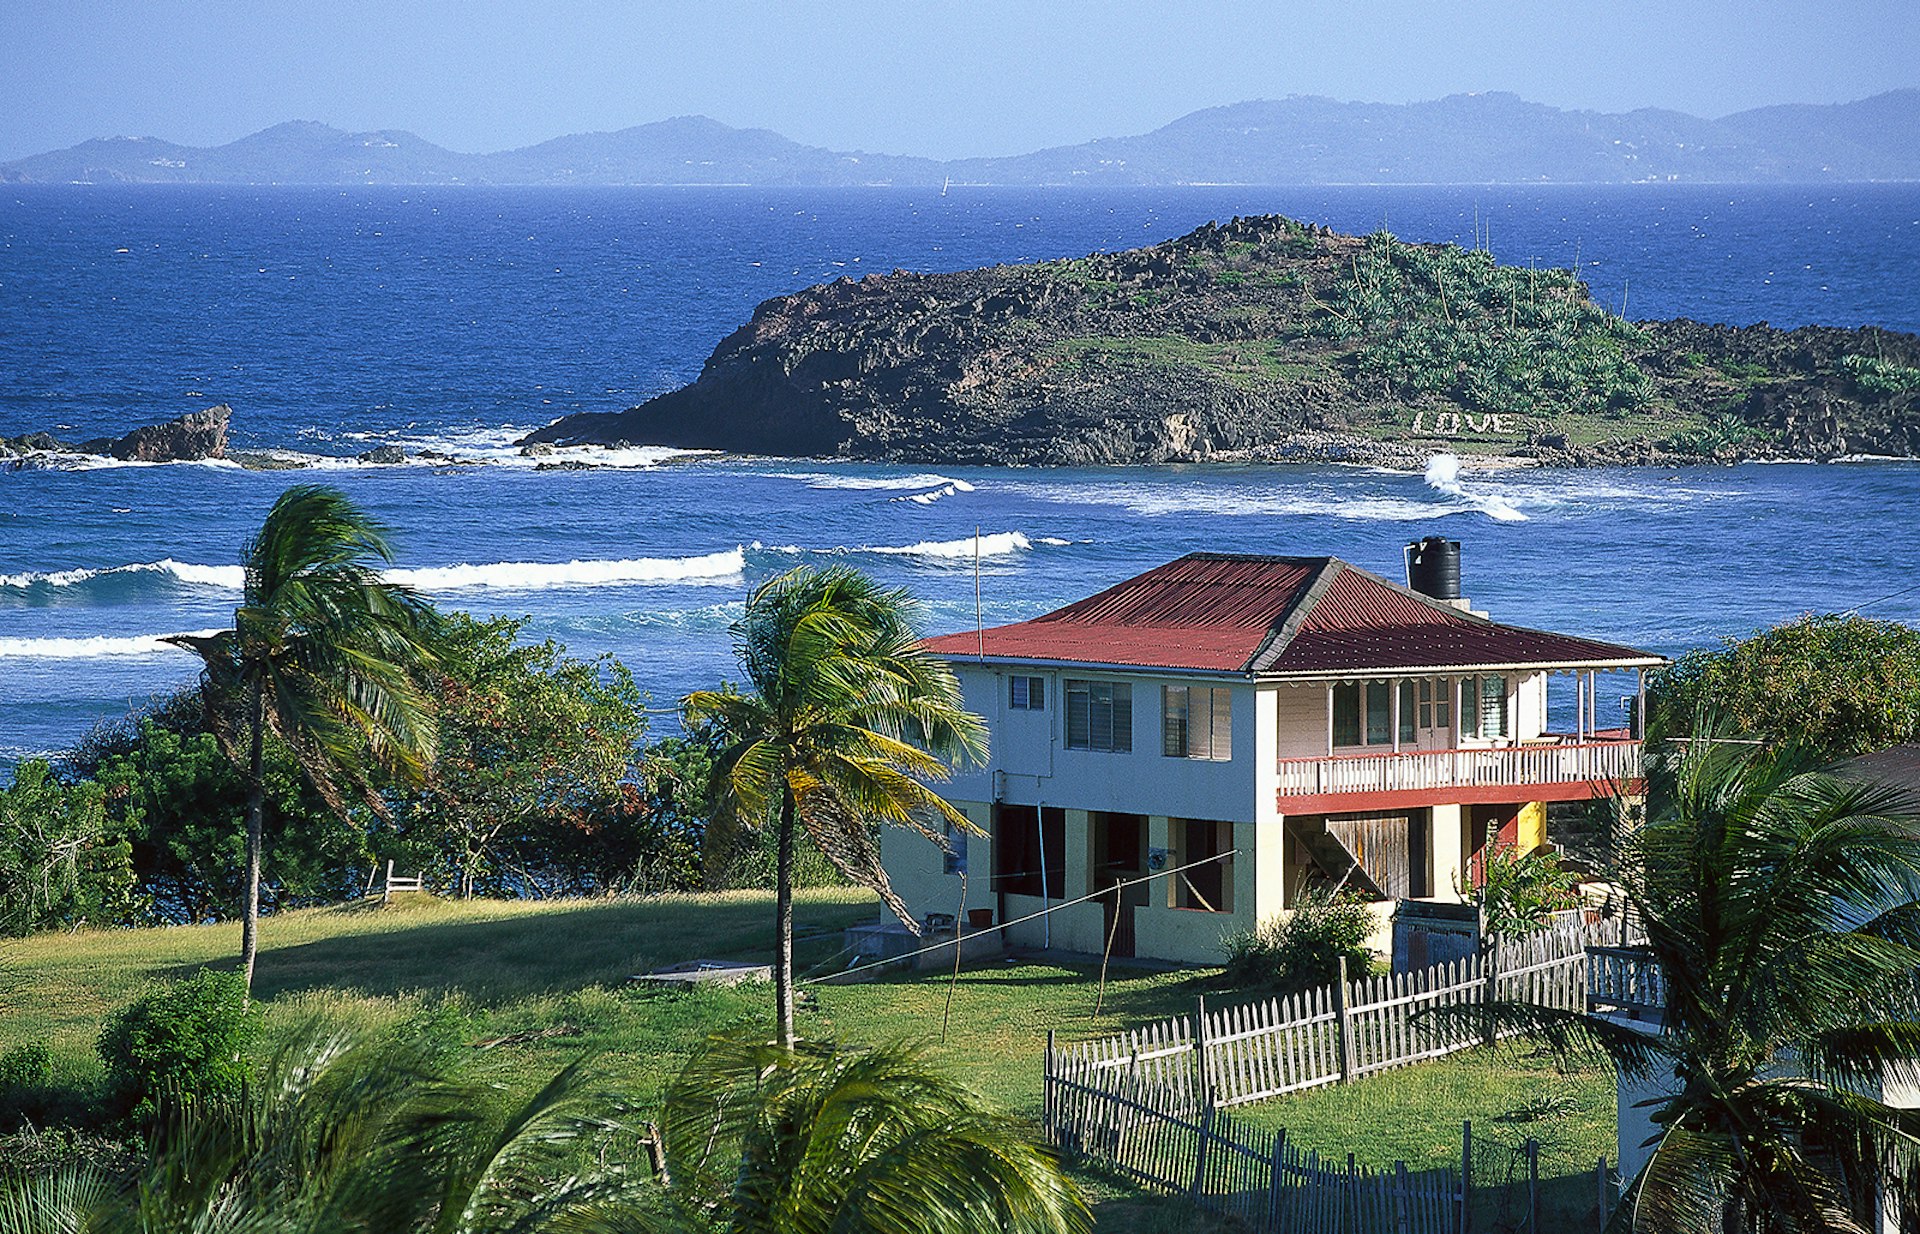 A house on Friendship Bay in Bequia © Hauke Dressler / LOOK-foto / Getty Images